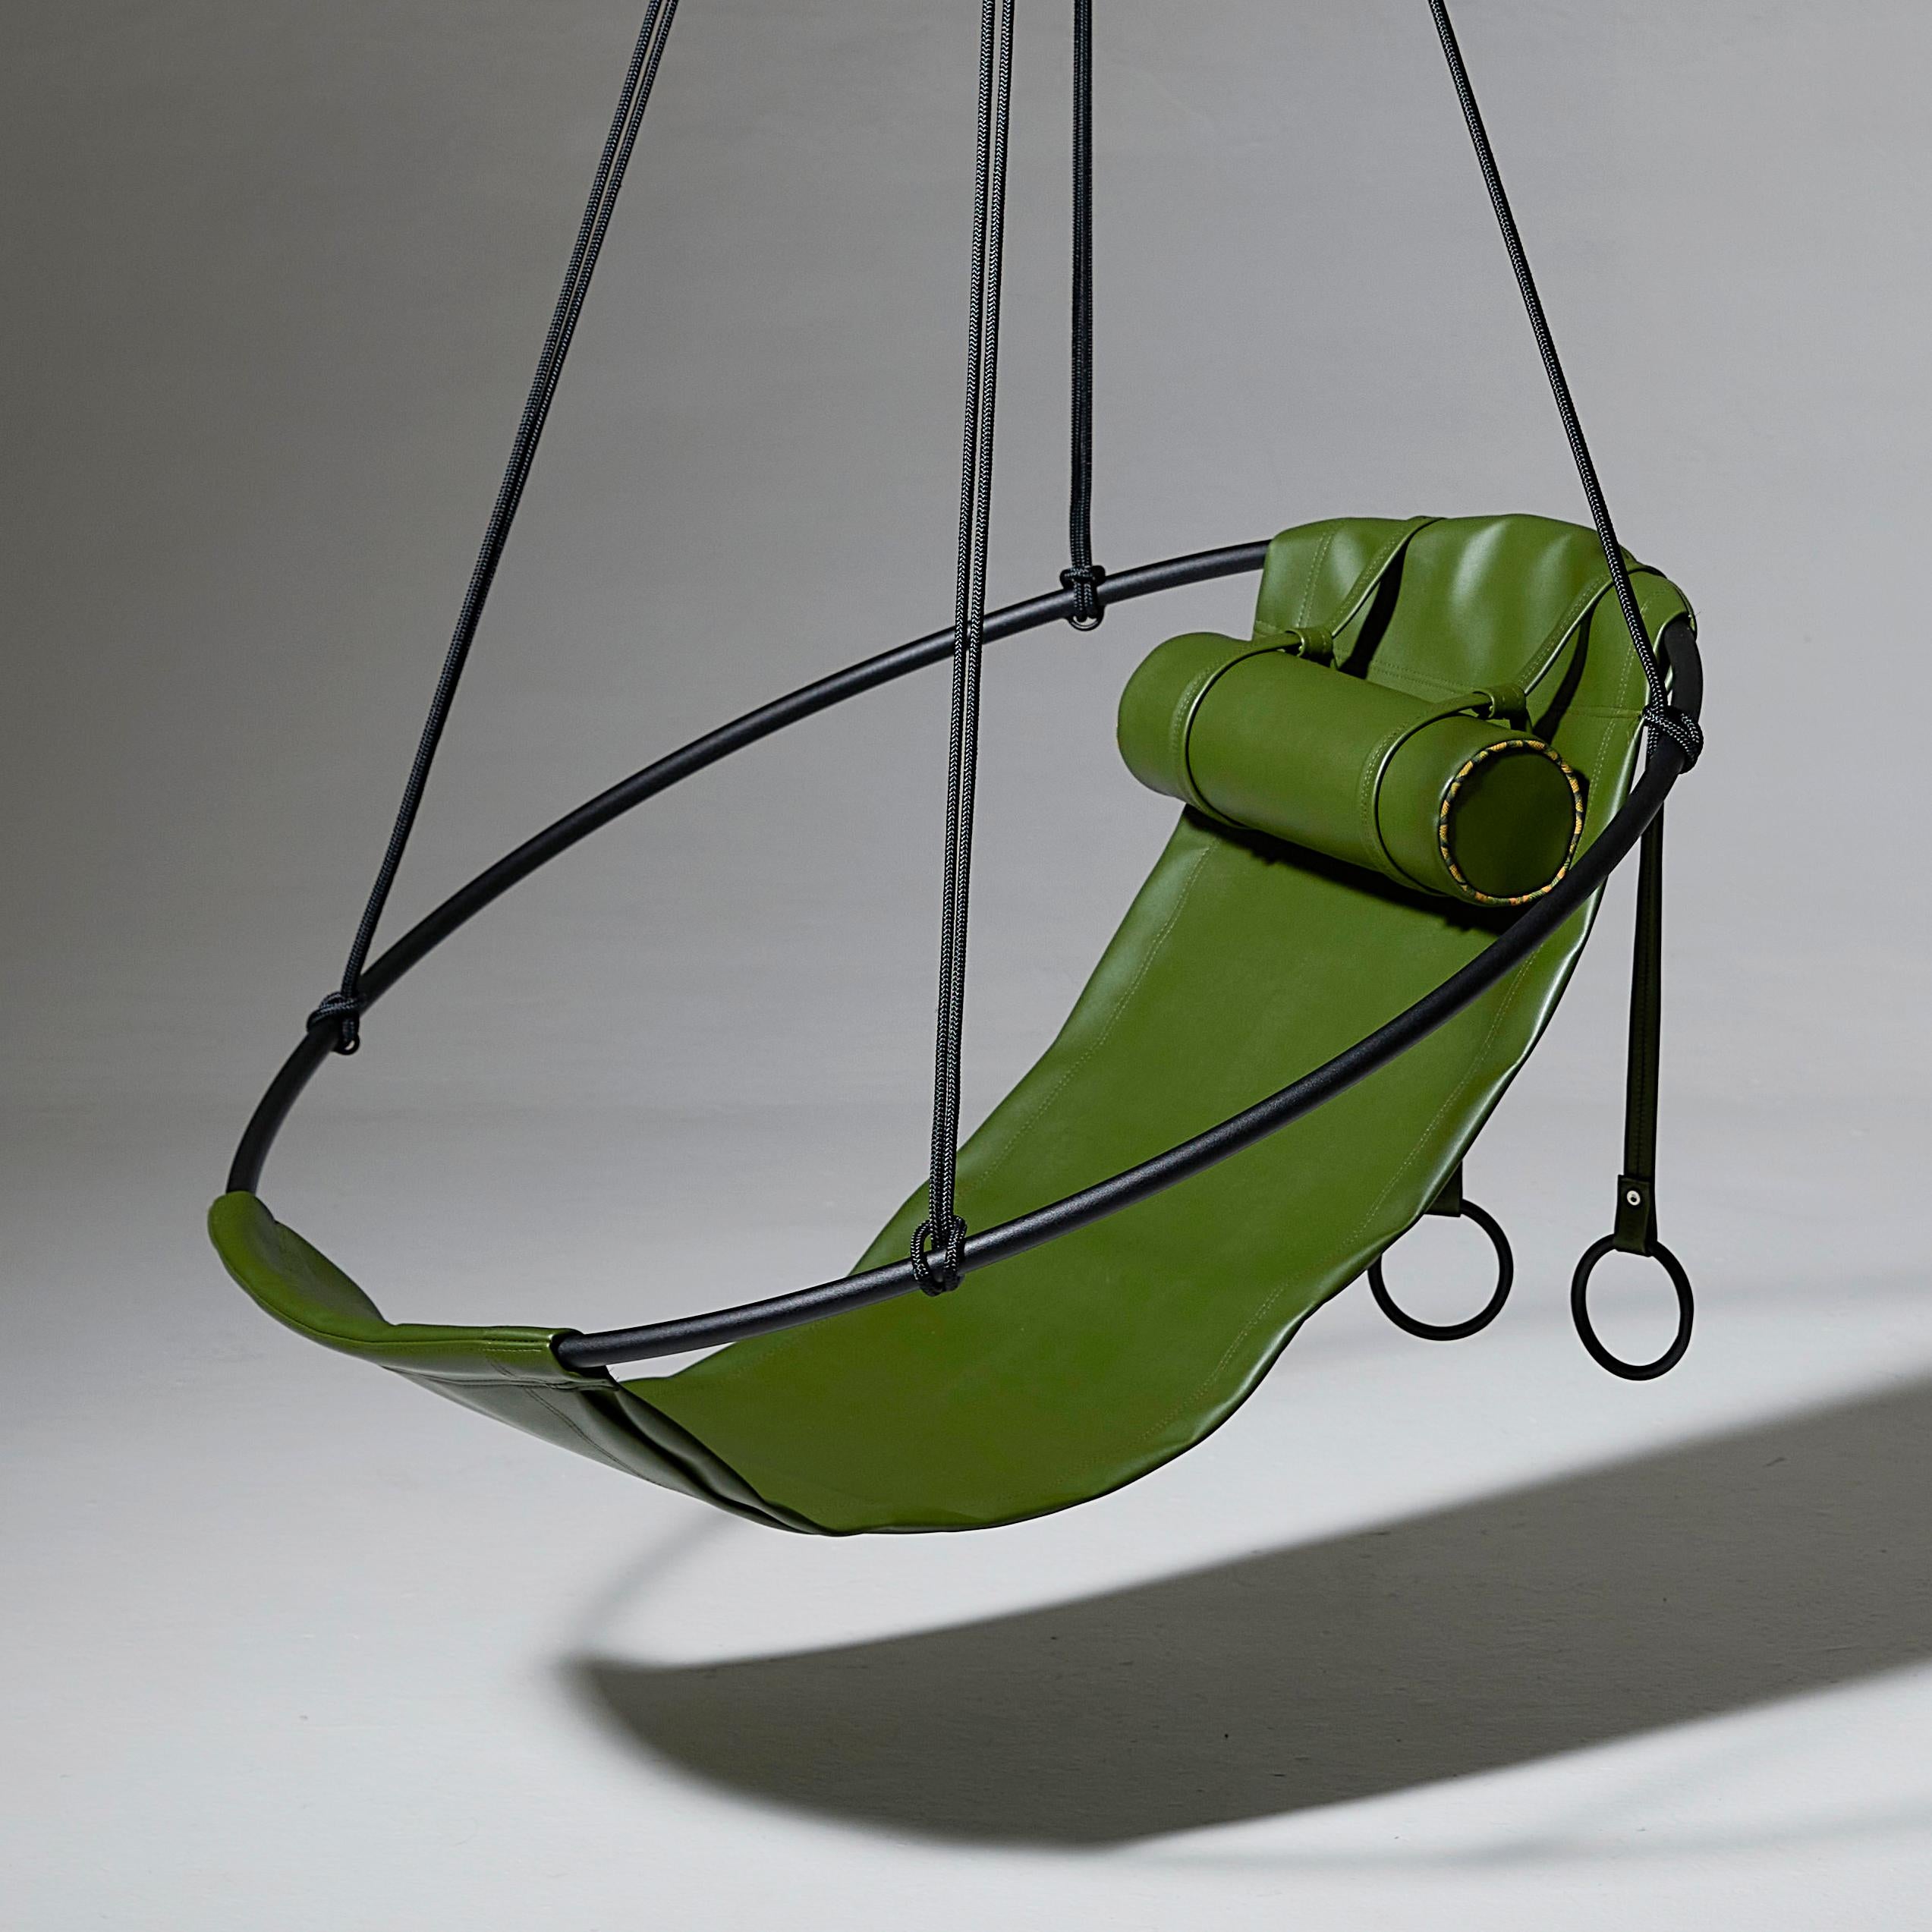 Our SLING hanging chair is crafted with Cactus leather – a highly-sustainable environmentally-friendly vegan material. The Cactus leather is made from the Nopal cactus, also known as the prickly pear.
The cactus leather seat and the piping of the